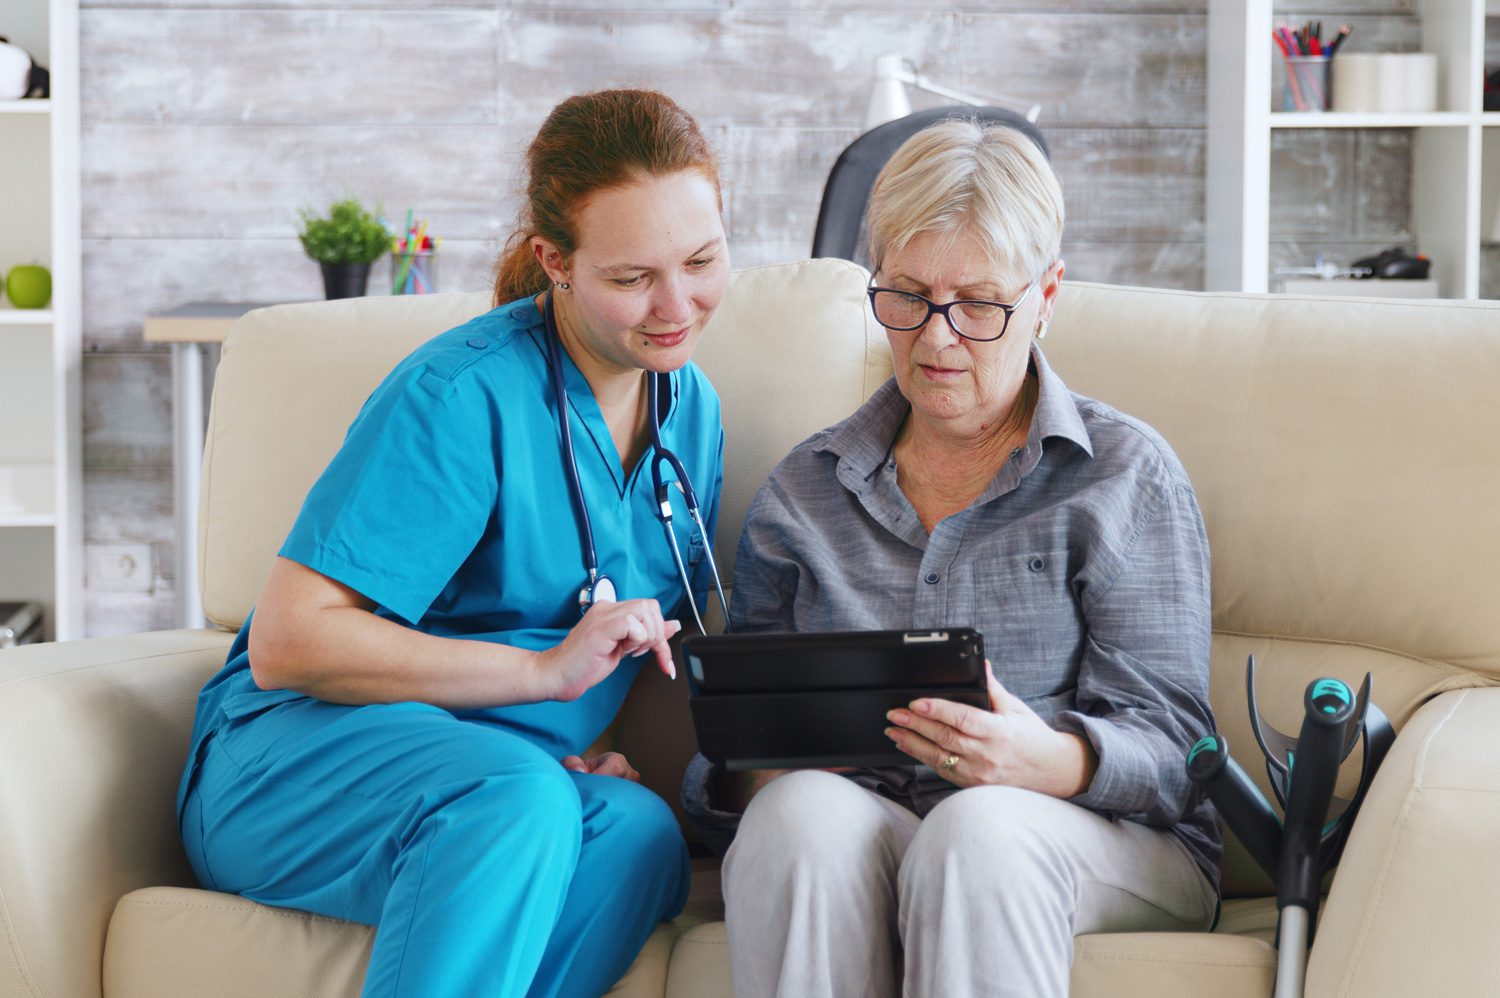 Nurse And Patient On Tablet